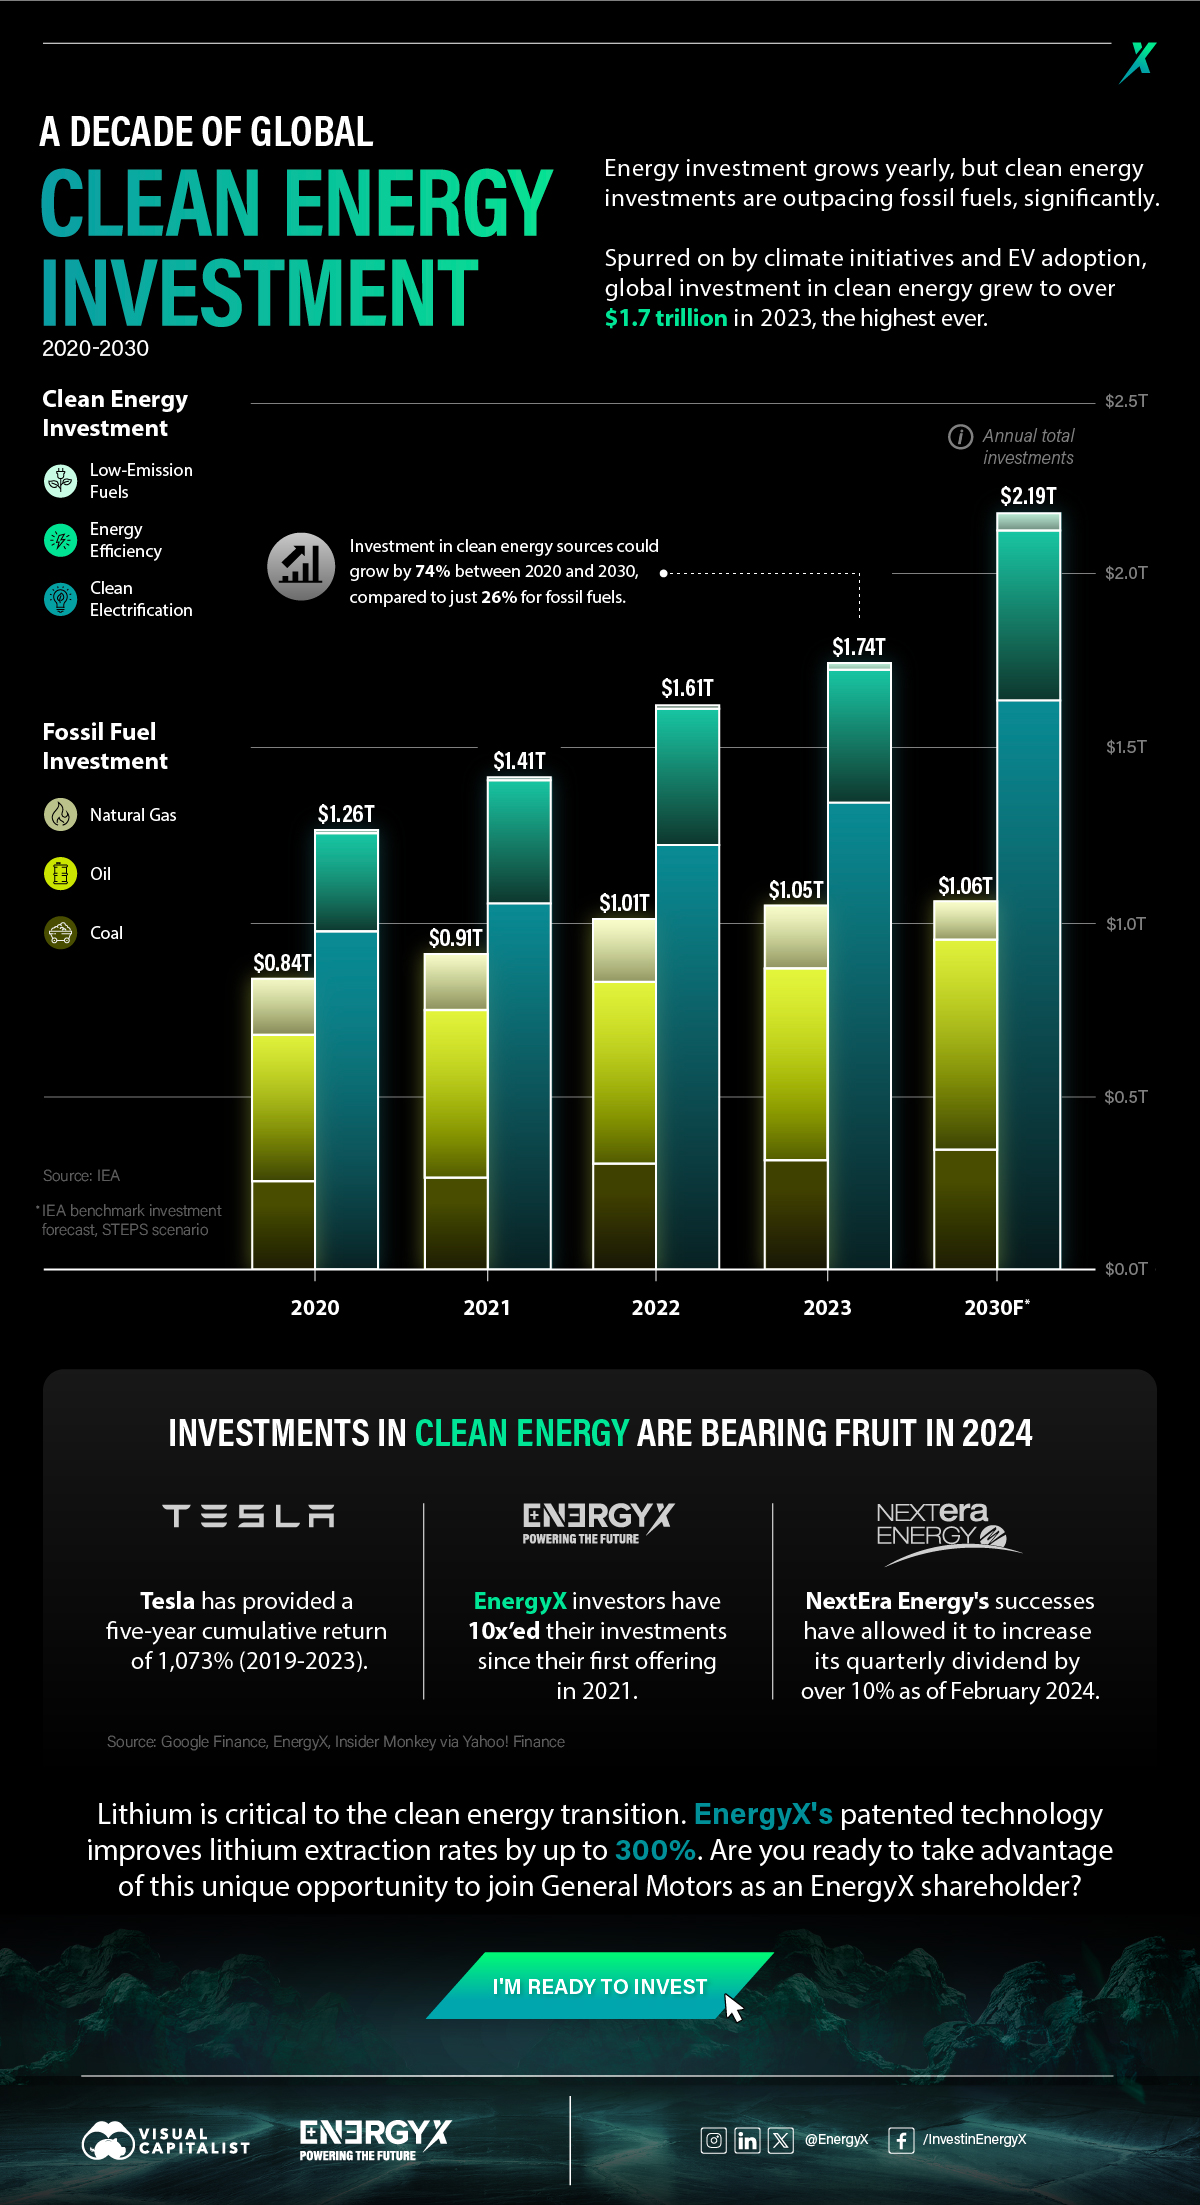 A graphic with a bar chart comparing global investment in clean energy and fossil fuels between 2020 and 2023 and then providing 2030 investment forecasts. The graphic also provides three examples of clean energy investments that bore fruit for investors.